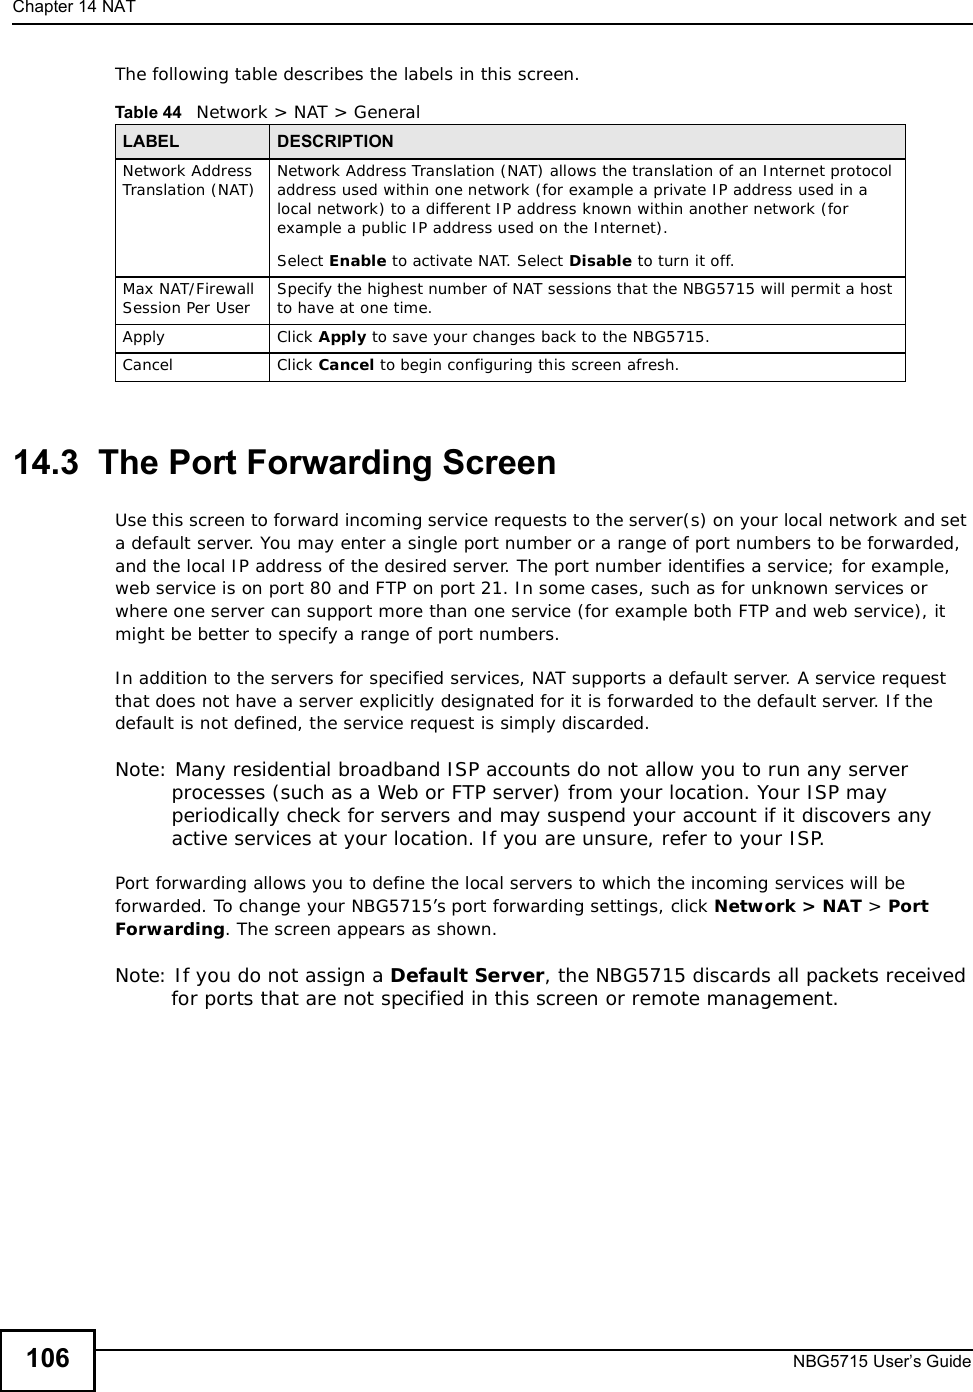 Chapter 14NATNBG5715 User’s Guide106The following table describes the labels in this screen.14.3  The Port Forwarding ScreenUse thisscreen to forward incoming service requests to the server(s) on your local network and set a default server. You may enter a single port number or a range of port numbers to be forwarded, and the local IP address of the desired server. The port number identifies a service; for example, web service is on port 80 and FTP on port 21. In some cases, such as for unknown services or where one server can support more than one service (for example both FTP and web service), it might be better to specify a range of port numbers.In addition to the servers for specified services, NAT supports a default server. A service request that does not have a server explicitly designated for it is forwarded to the default server. If the default is not defined, the service request is simply discarded.Note: Many residential broadband ISP accounts do not allow you to run any server processes (such as a Web or FTP server) from your location. Your ISP may periodically check for servers and may suspend your account if it discovers any active services at your location. If you are unsure, refer to your ISP.Port forwarding allows you to define the local servers to which the incoming services will be forwarded. To change your NBG5715’s port forwarding settings, click Network &gt; NAT &gt; PortForwarding. The screen appears as shown.Note: If you do not assign a Default Server, the NBG5715 discards all packets received for ports that are not specified in this screen or remote management.Table 44   Network &gt; NAT &gt; GeneralLABEL DESCRIPTIONNetwork Address Translation (NAT) Network Address Translation (NAT) allows the translation of an Internet protocol address used within one network (for example a private IP address used in a local network) to a different IP address known within another network (for example a public IP address used on the Internet). Select Enable to activate NAT. Select Disable to turn it off.Max NAT/Firewall Session Per User Specify the highest number of NAT sessions that the NBG5715 will permit a host to have at one time.Apply Click Apply to save your changes back to the NBG5715.Cancel Click Cancel to begin configuring this screen afresh.